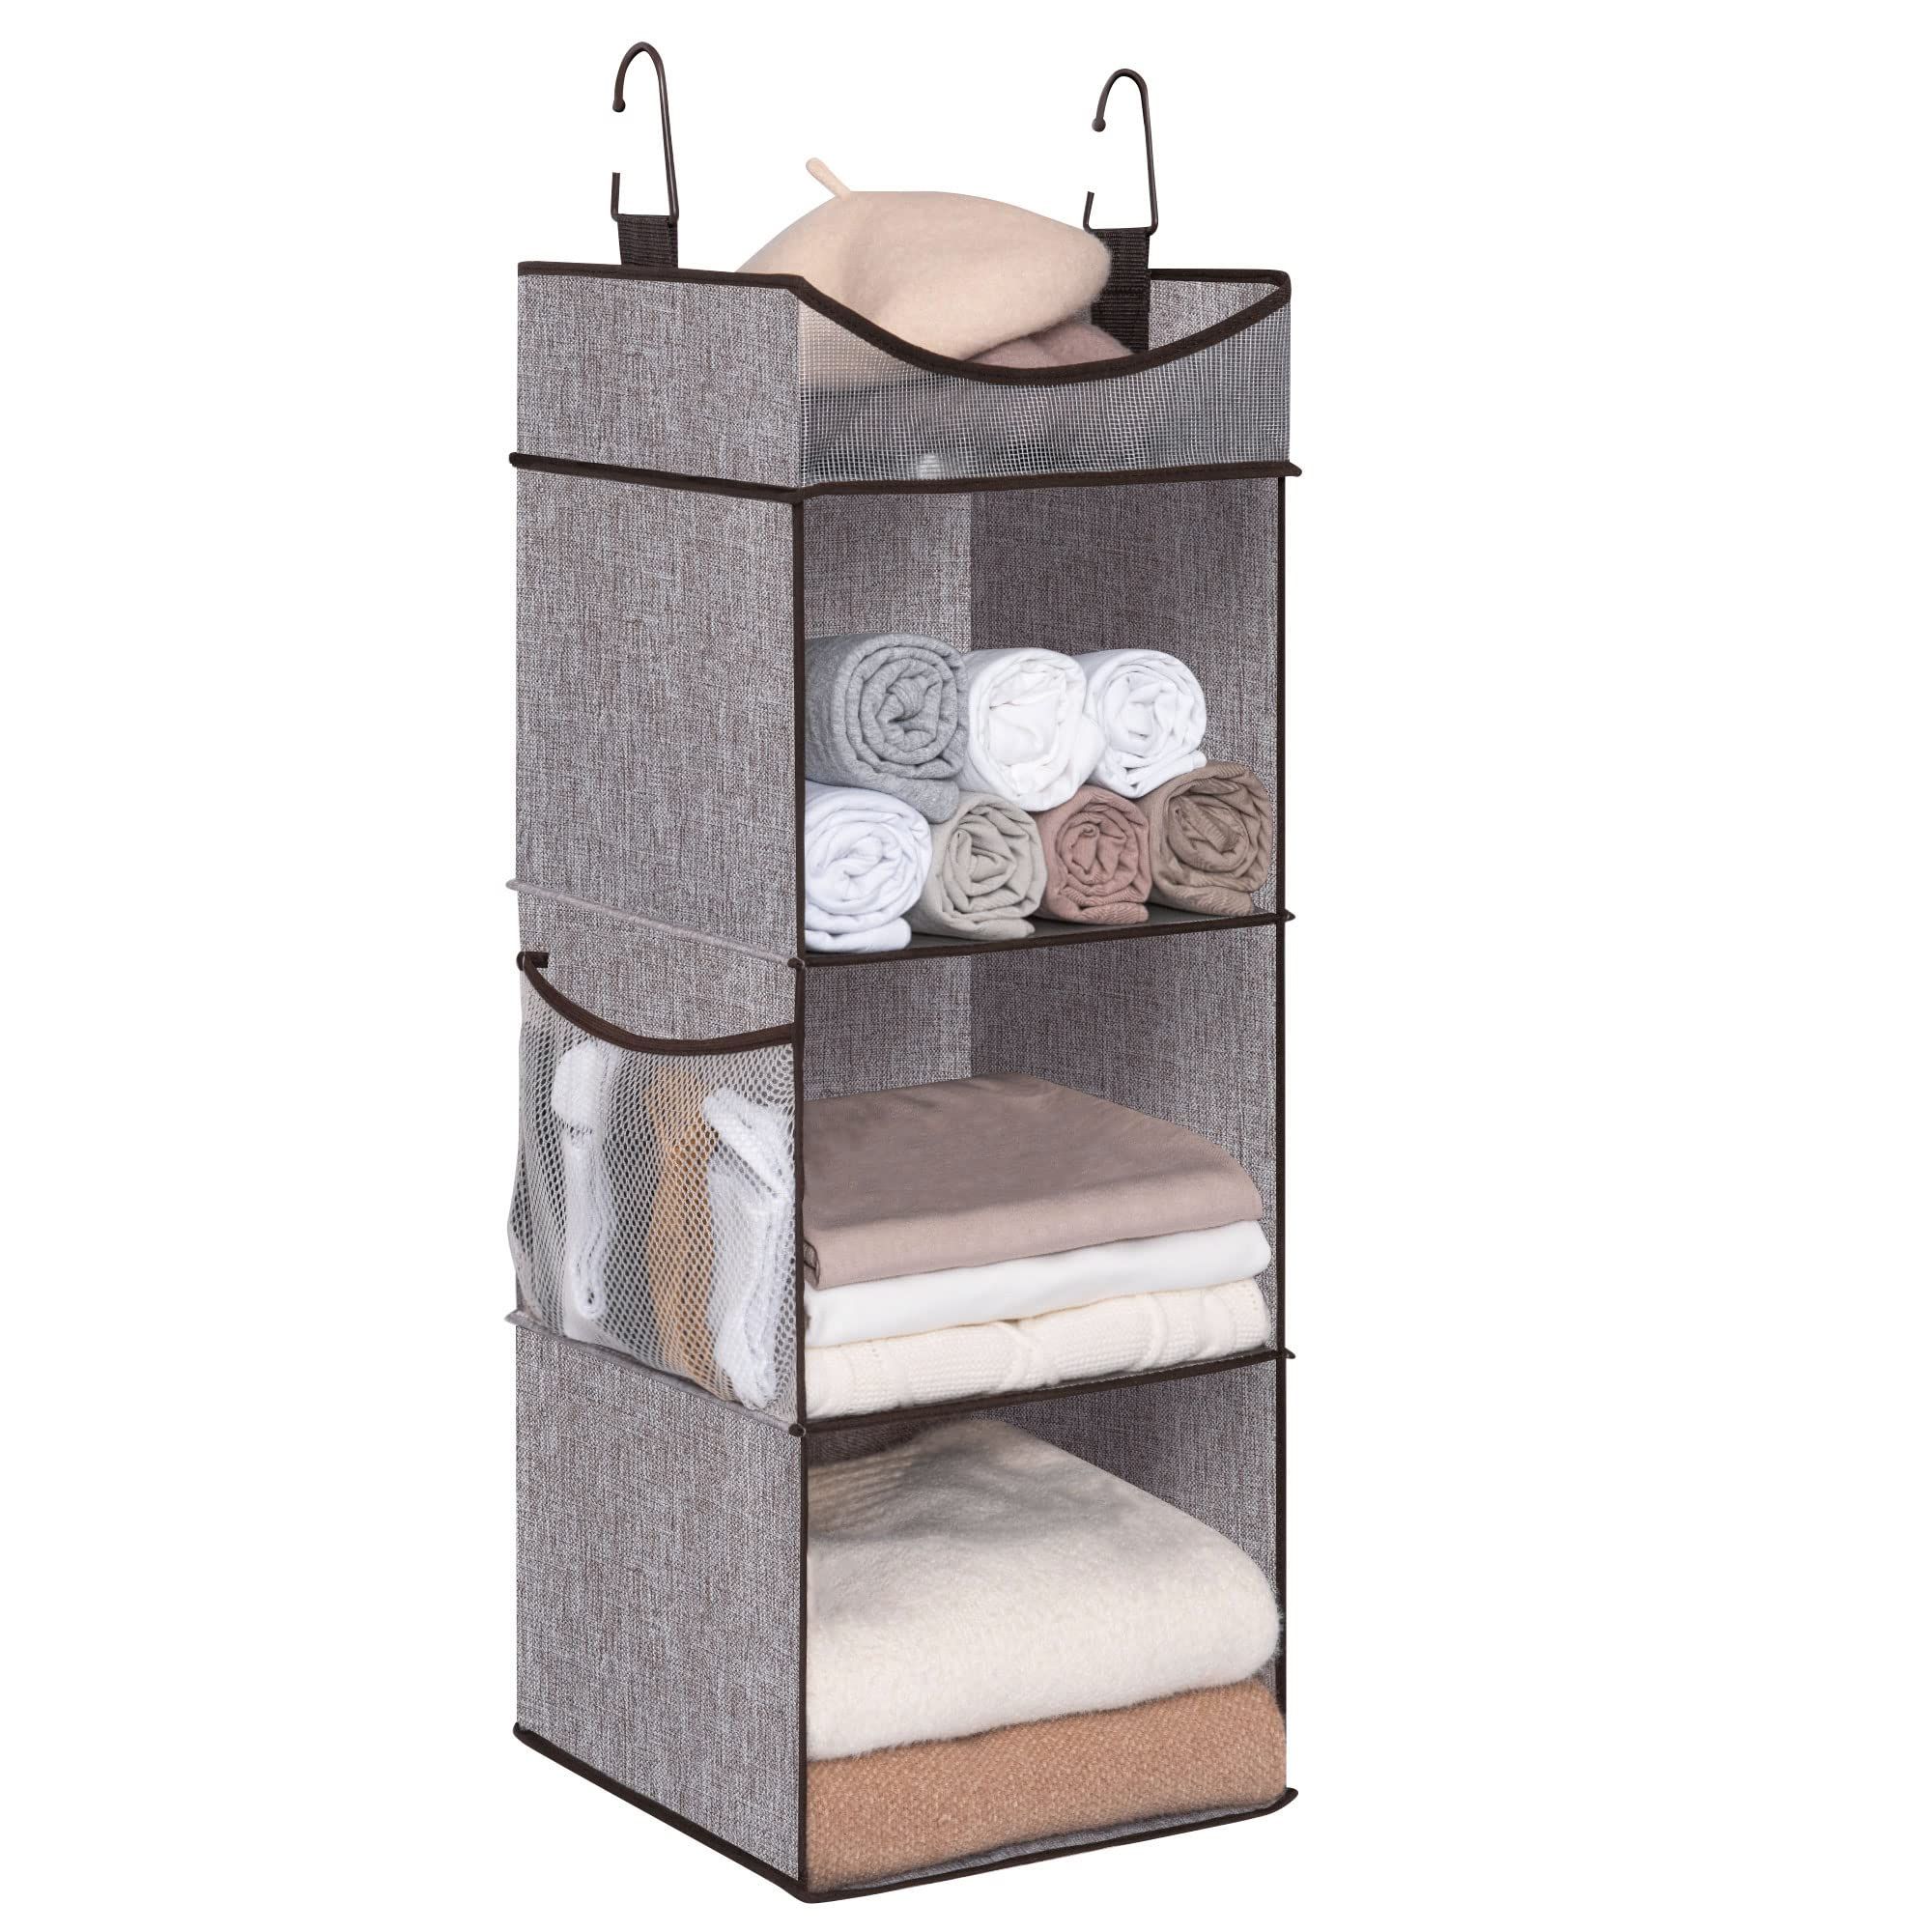 3 Shelf Hanging Shelves Wardrobes For Favorite Amazon: Storageworks Hanging Closet Organizer, 3 Shelf Hanging Closet  Shelves With Top Shelf, 12" W X 12" D X 35 ¼"h, Extra Large Space, Mixing  Of Brown And Gray : Home & Kitchen (Photo 6 of 10)